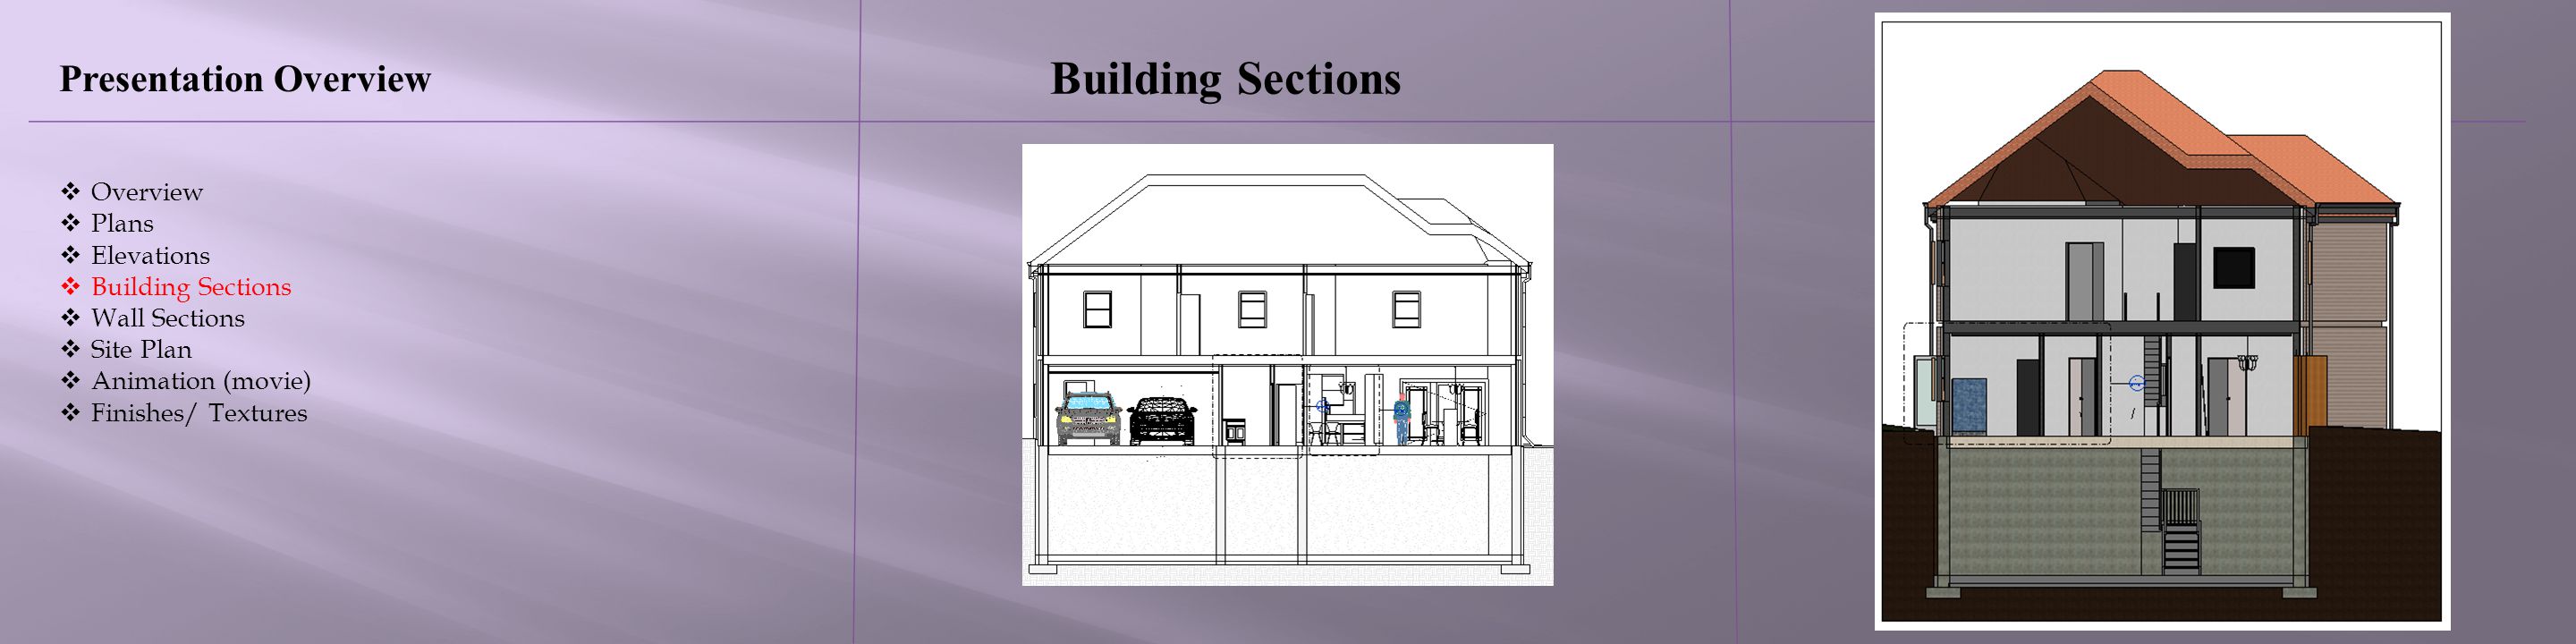 Building Sections Presentation Overview Overview Plans Elevations